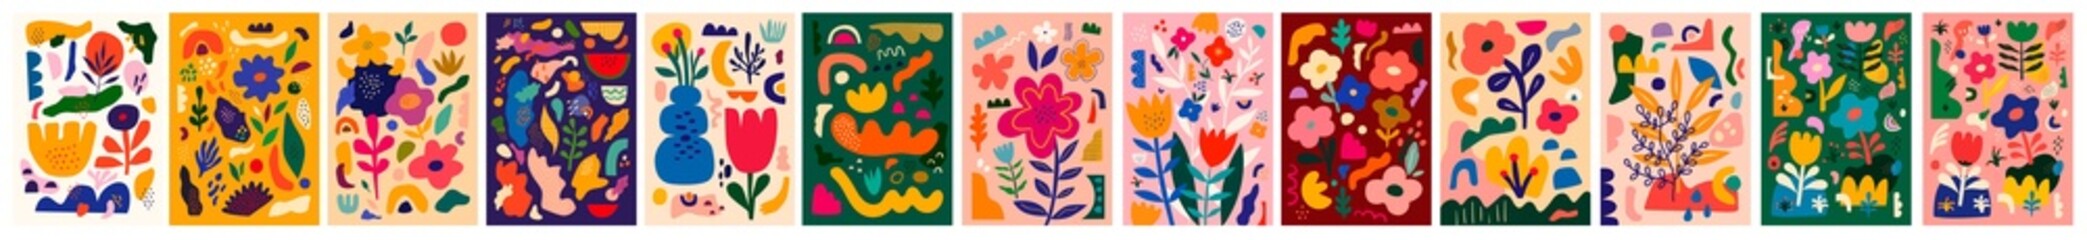 Wall Mural - Trendy posters and cards with flowers and abstract patterns. Summer bright colourful abstract collection of posters. Set of amazing floral designs for Notebook covers.